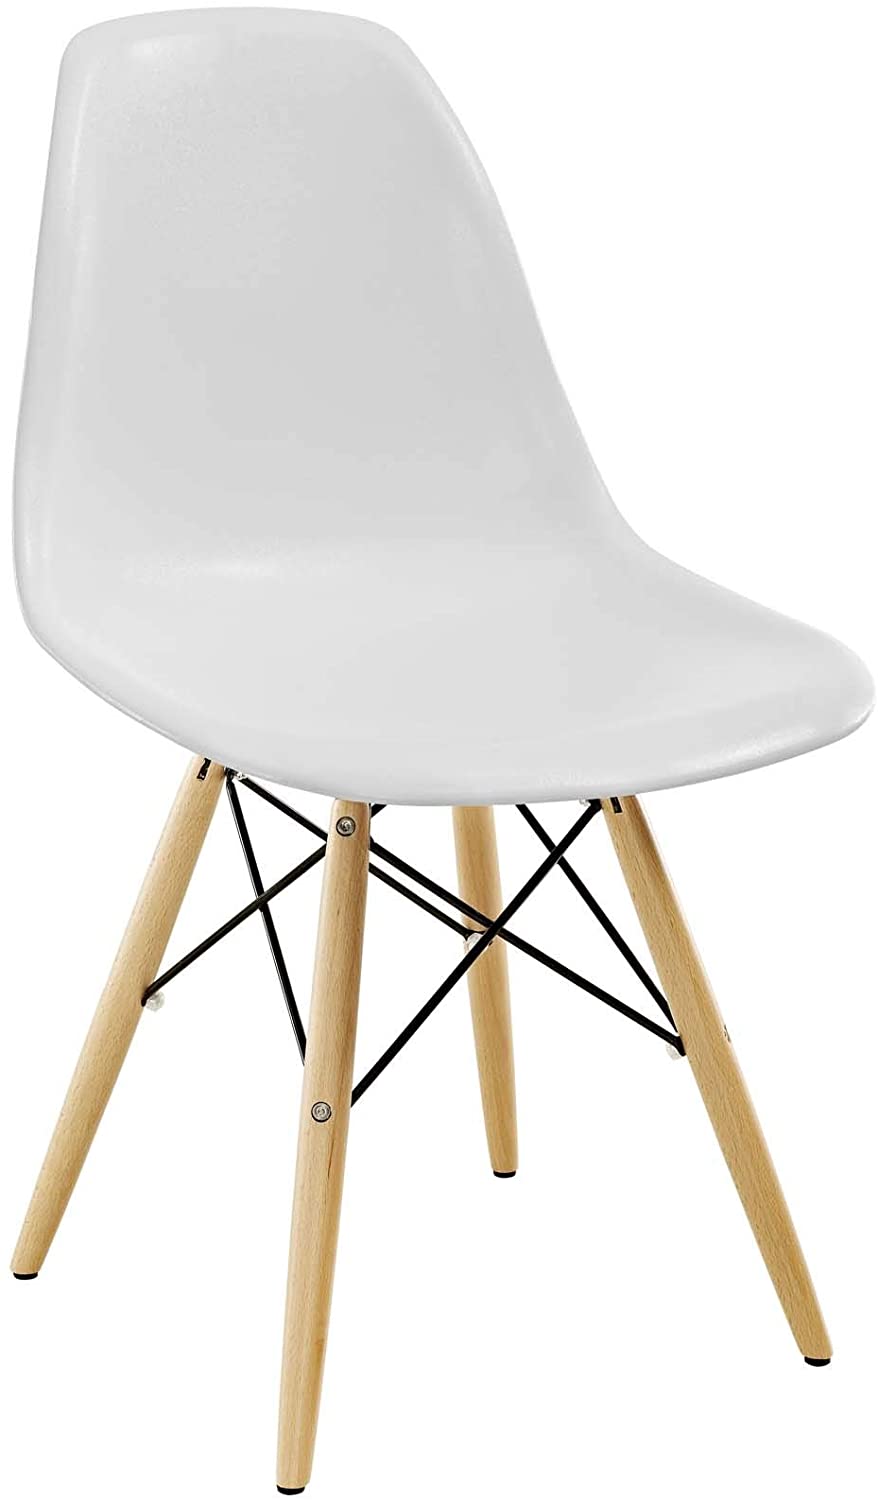 Hindoro Pyramid Mid Century Modern Kitchen And Dining Room Chair With